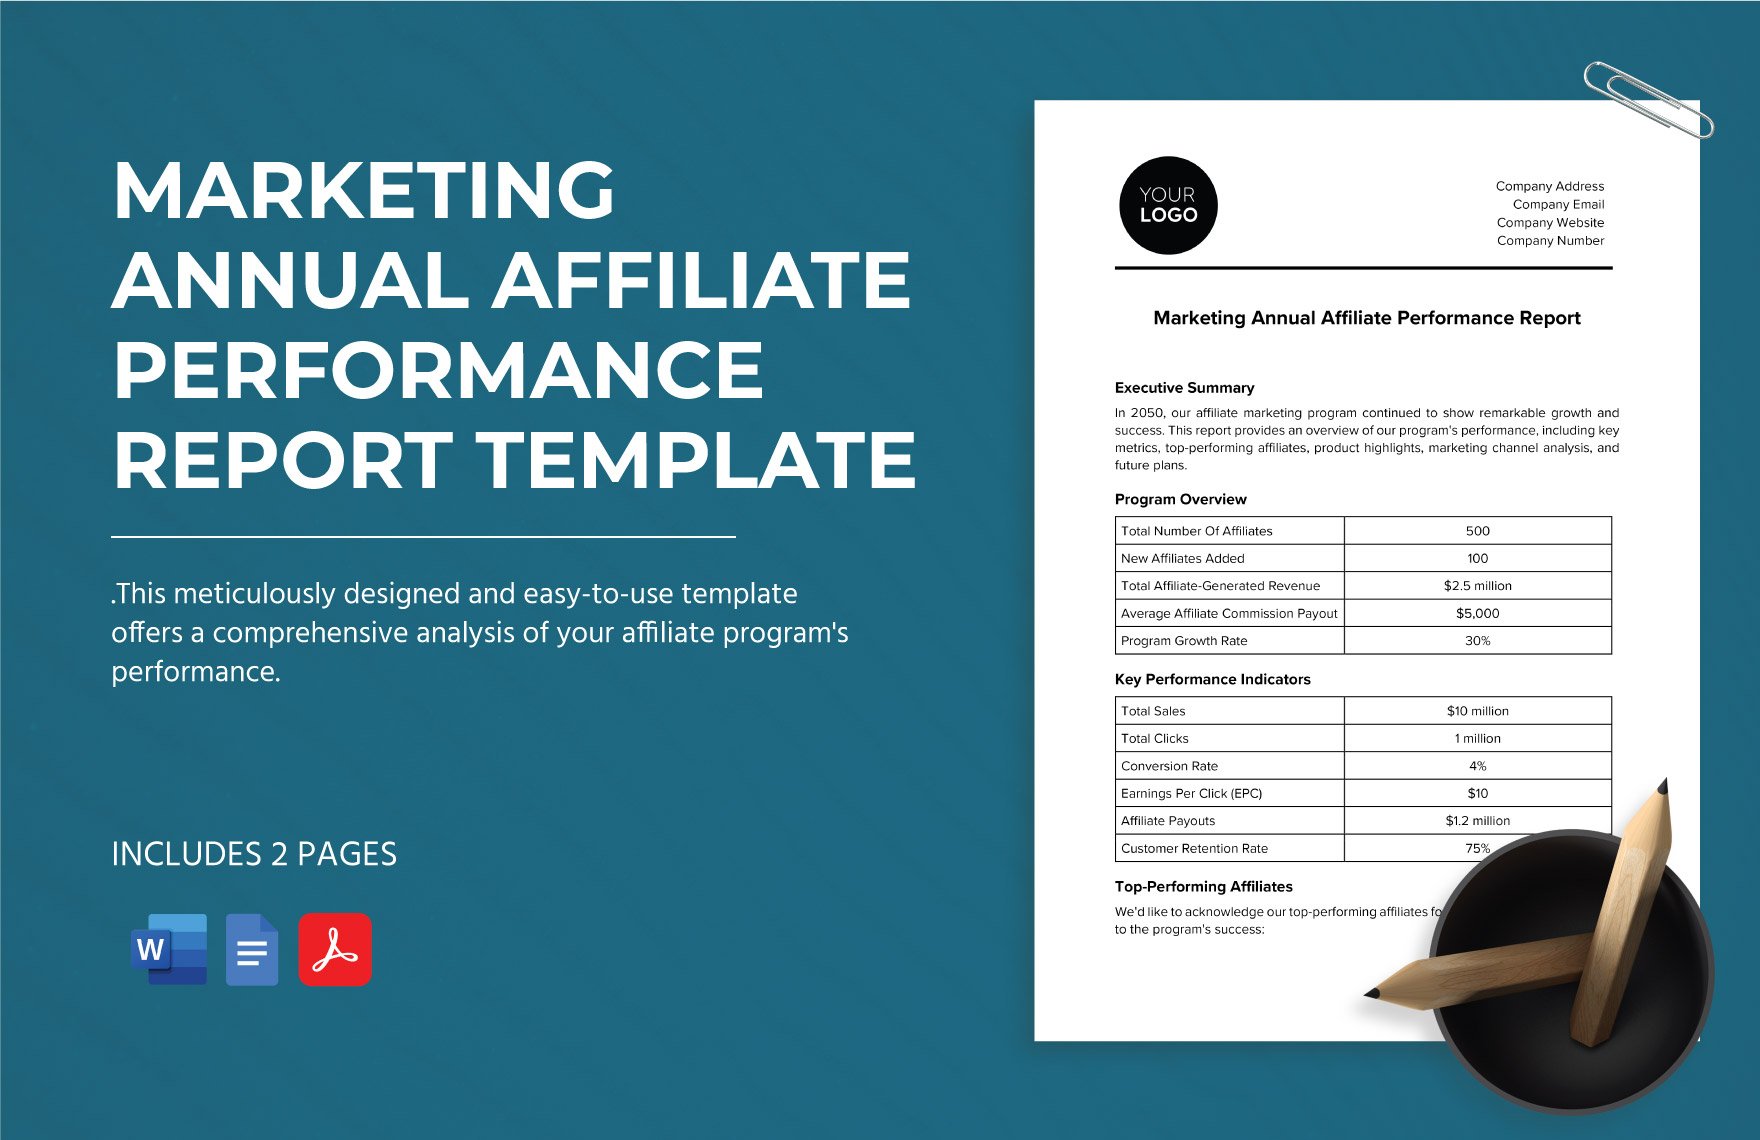 Marketing Annual Affiliate Performance Report Template